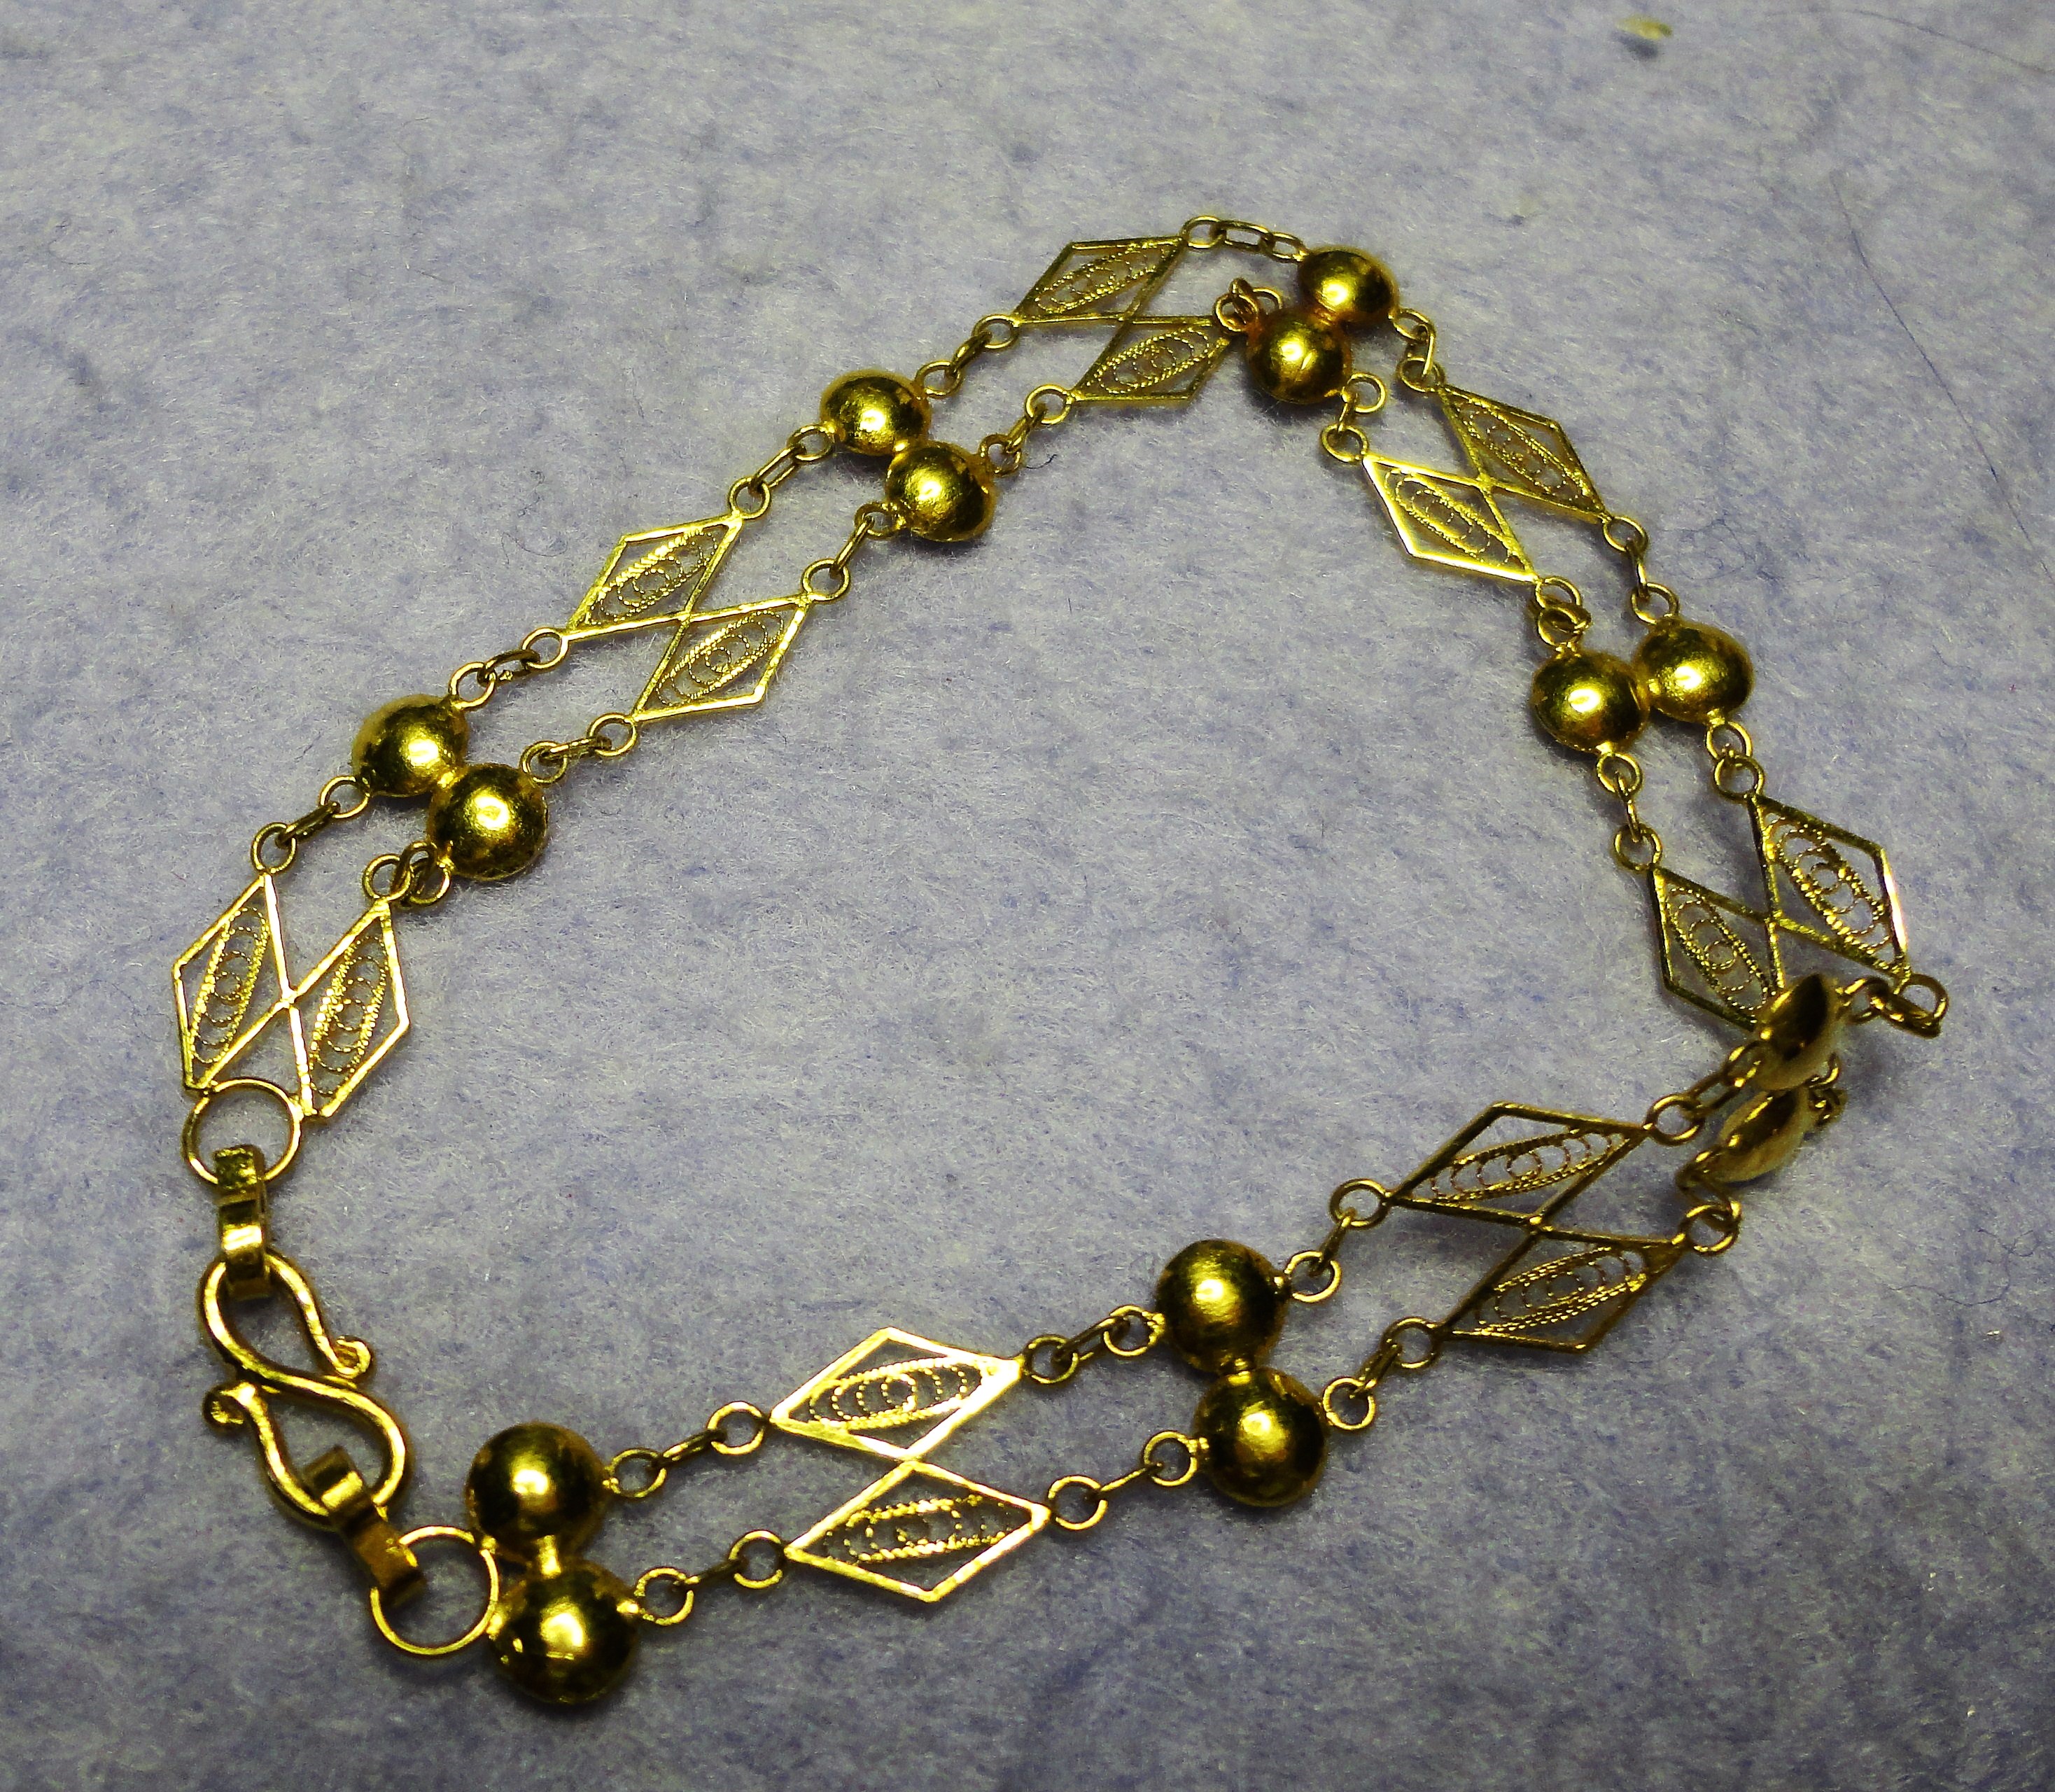 BRACELET 21KT SOLID YELLOW GOLD 8.56MM X 7 INCH $259